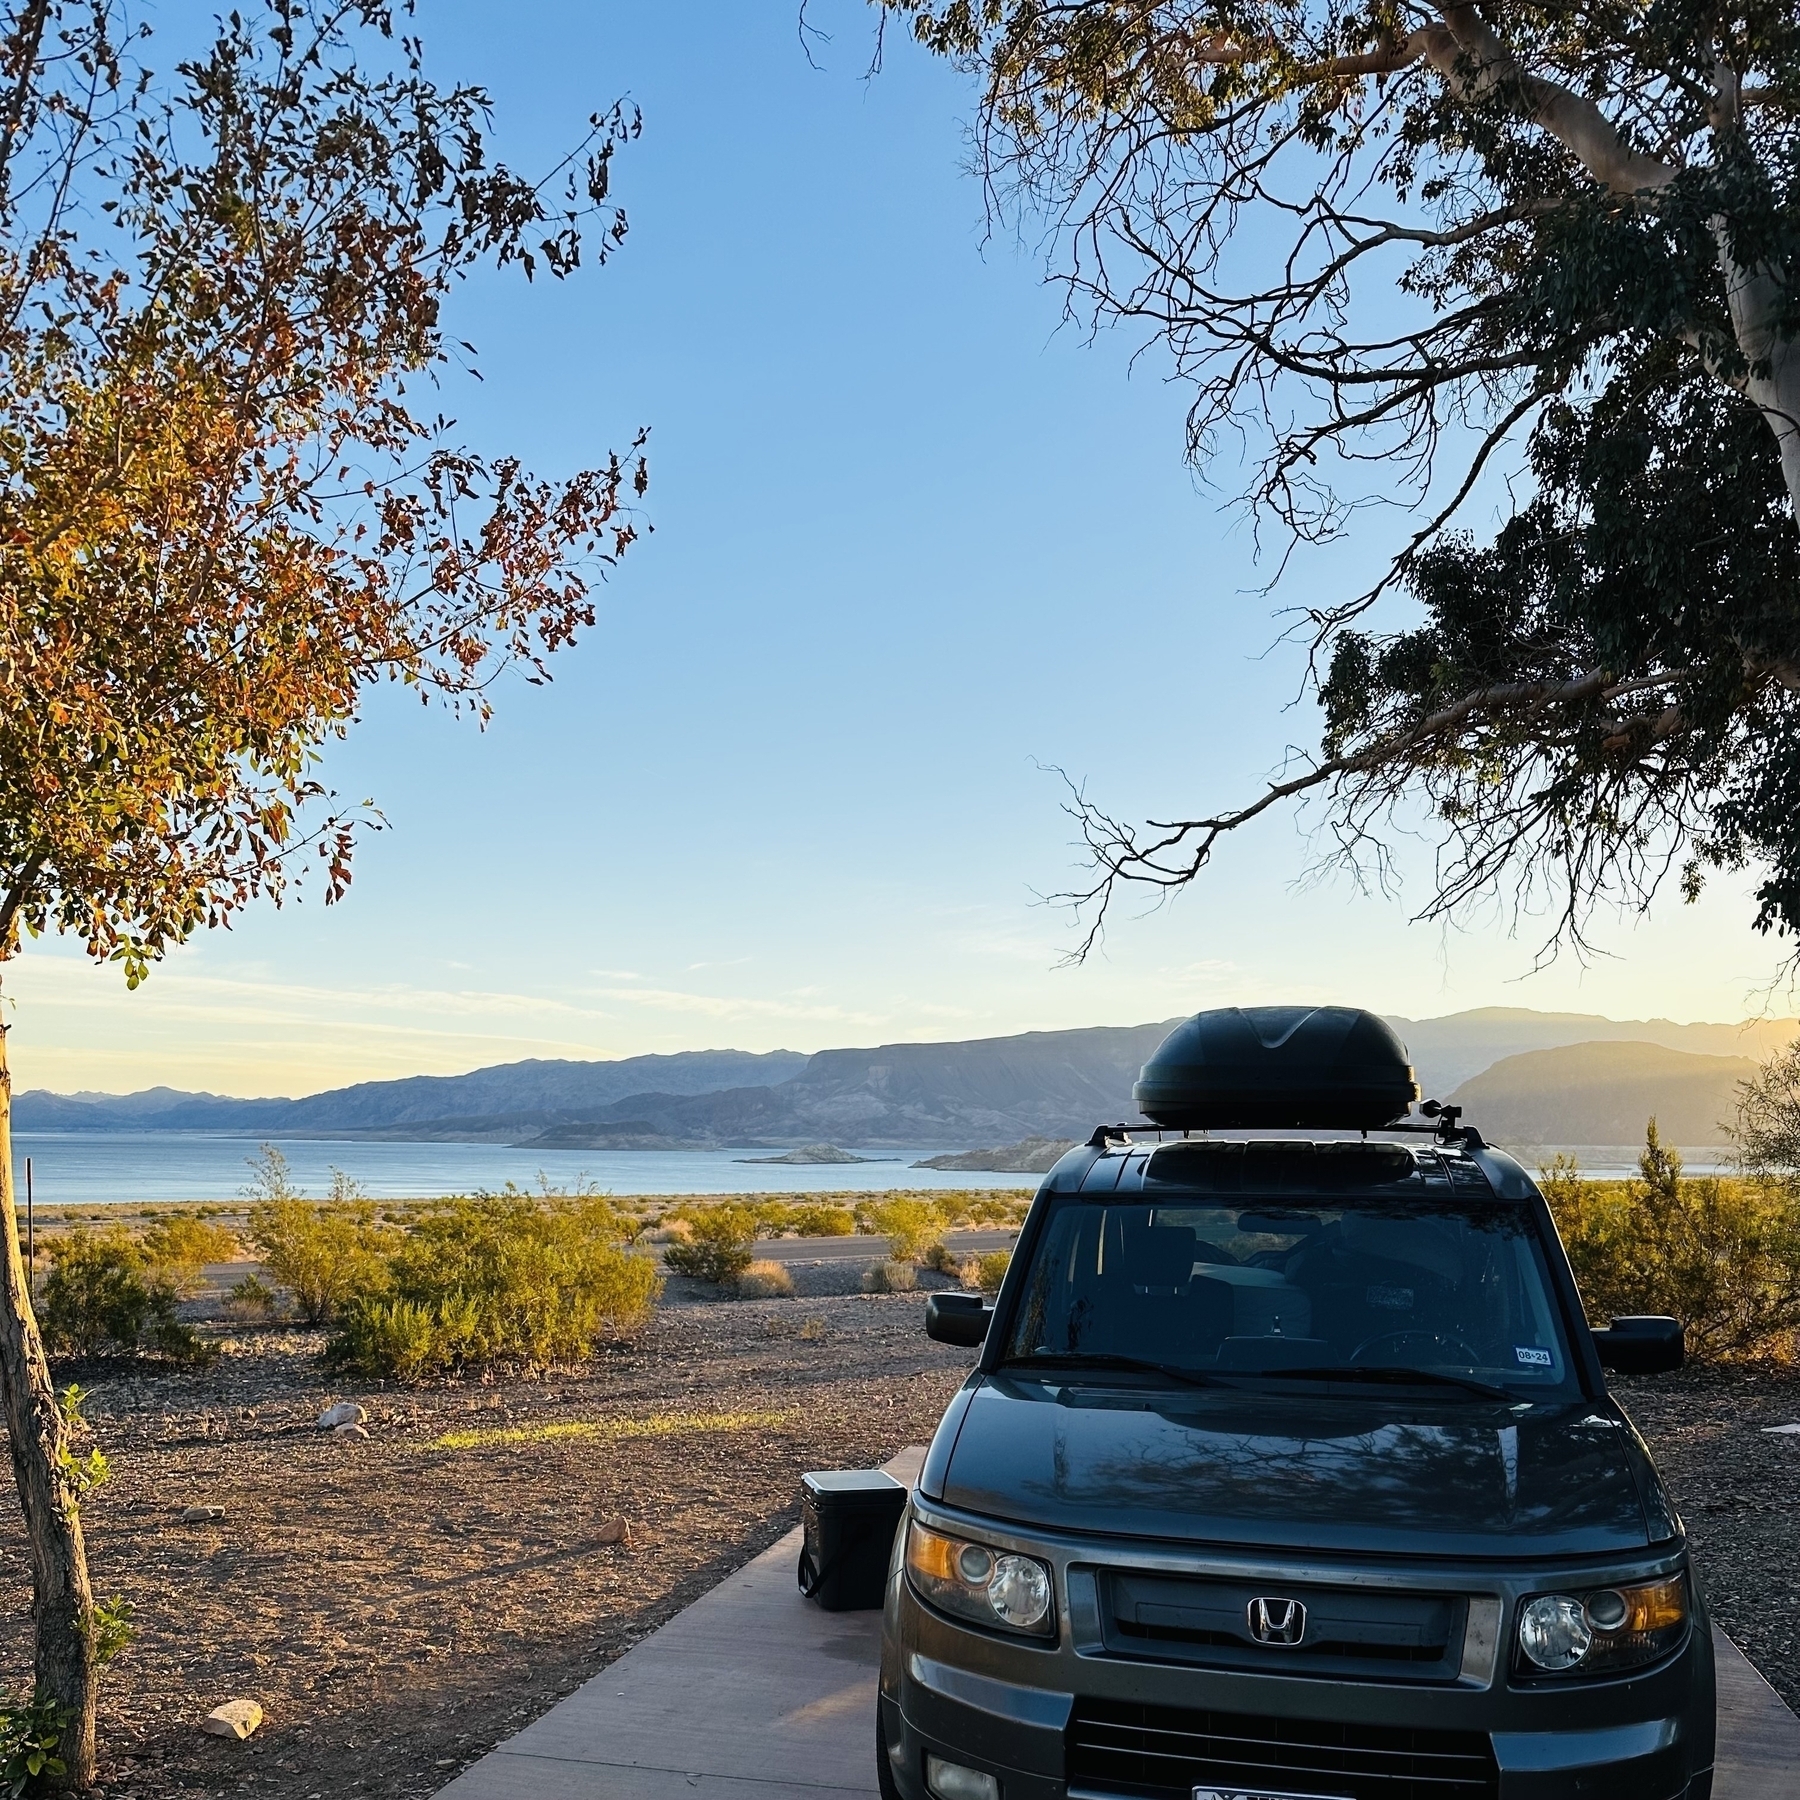 Honda Element with lake and mountains in background.